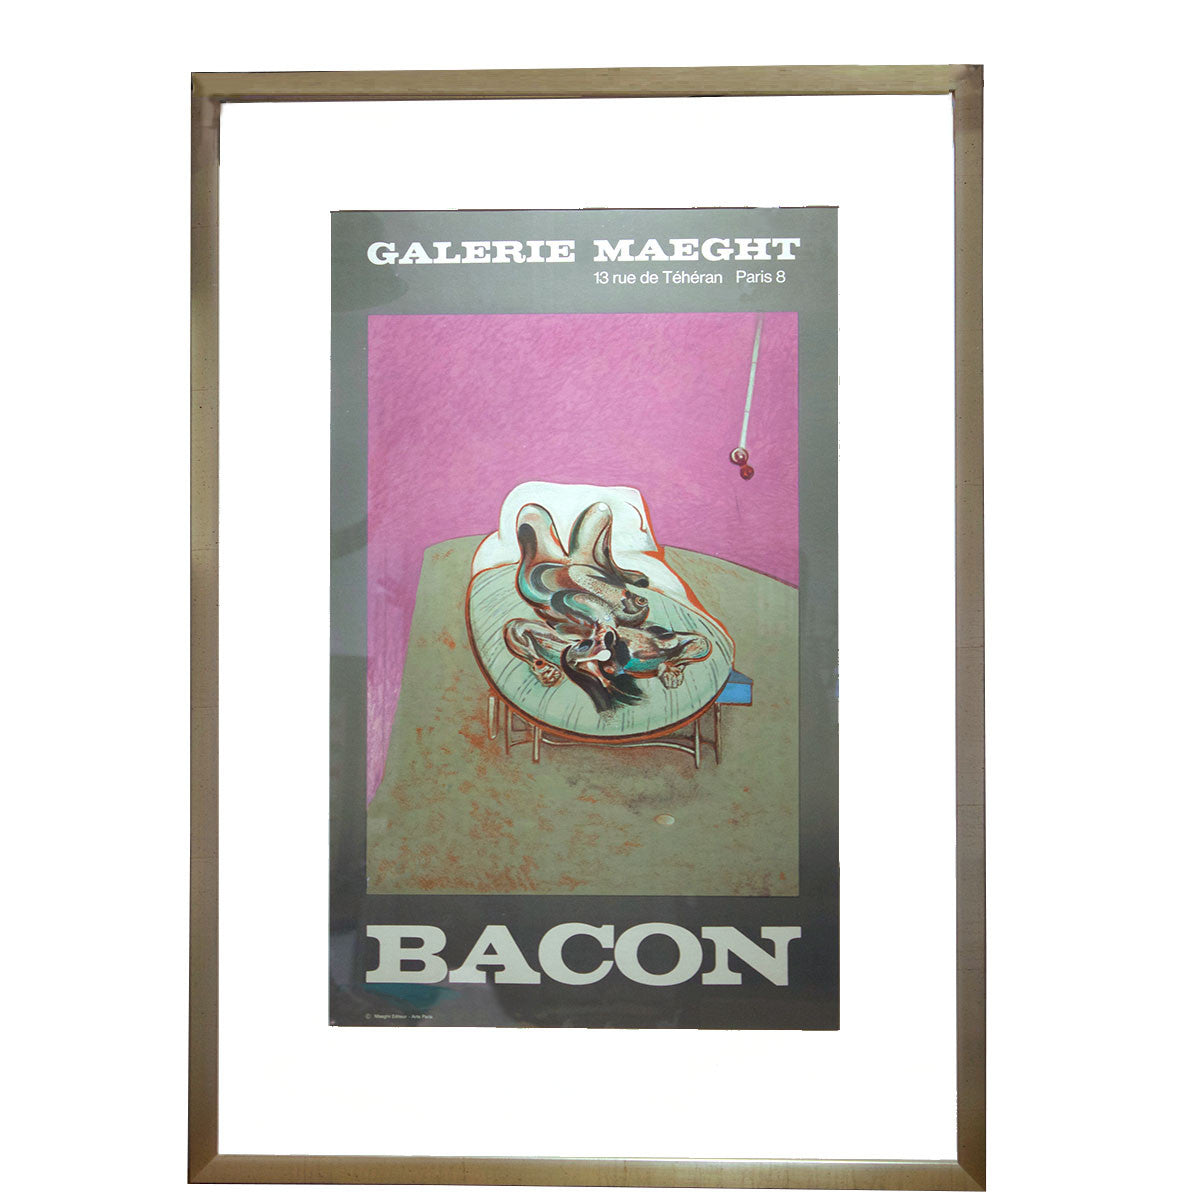 Framed Francis Bacon Gallery Maeght Off-Set Lithograph Poster